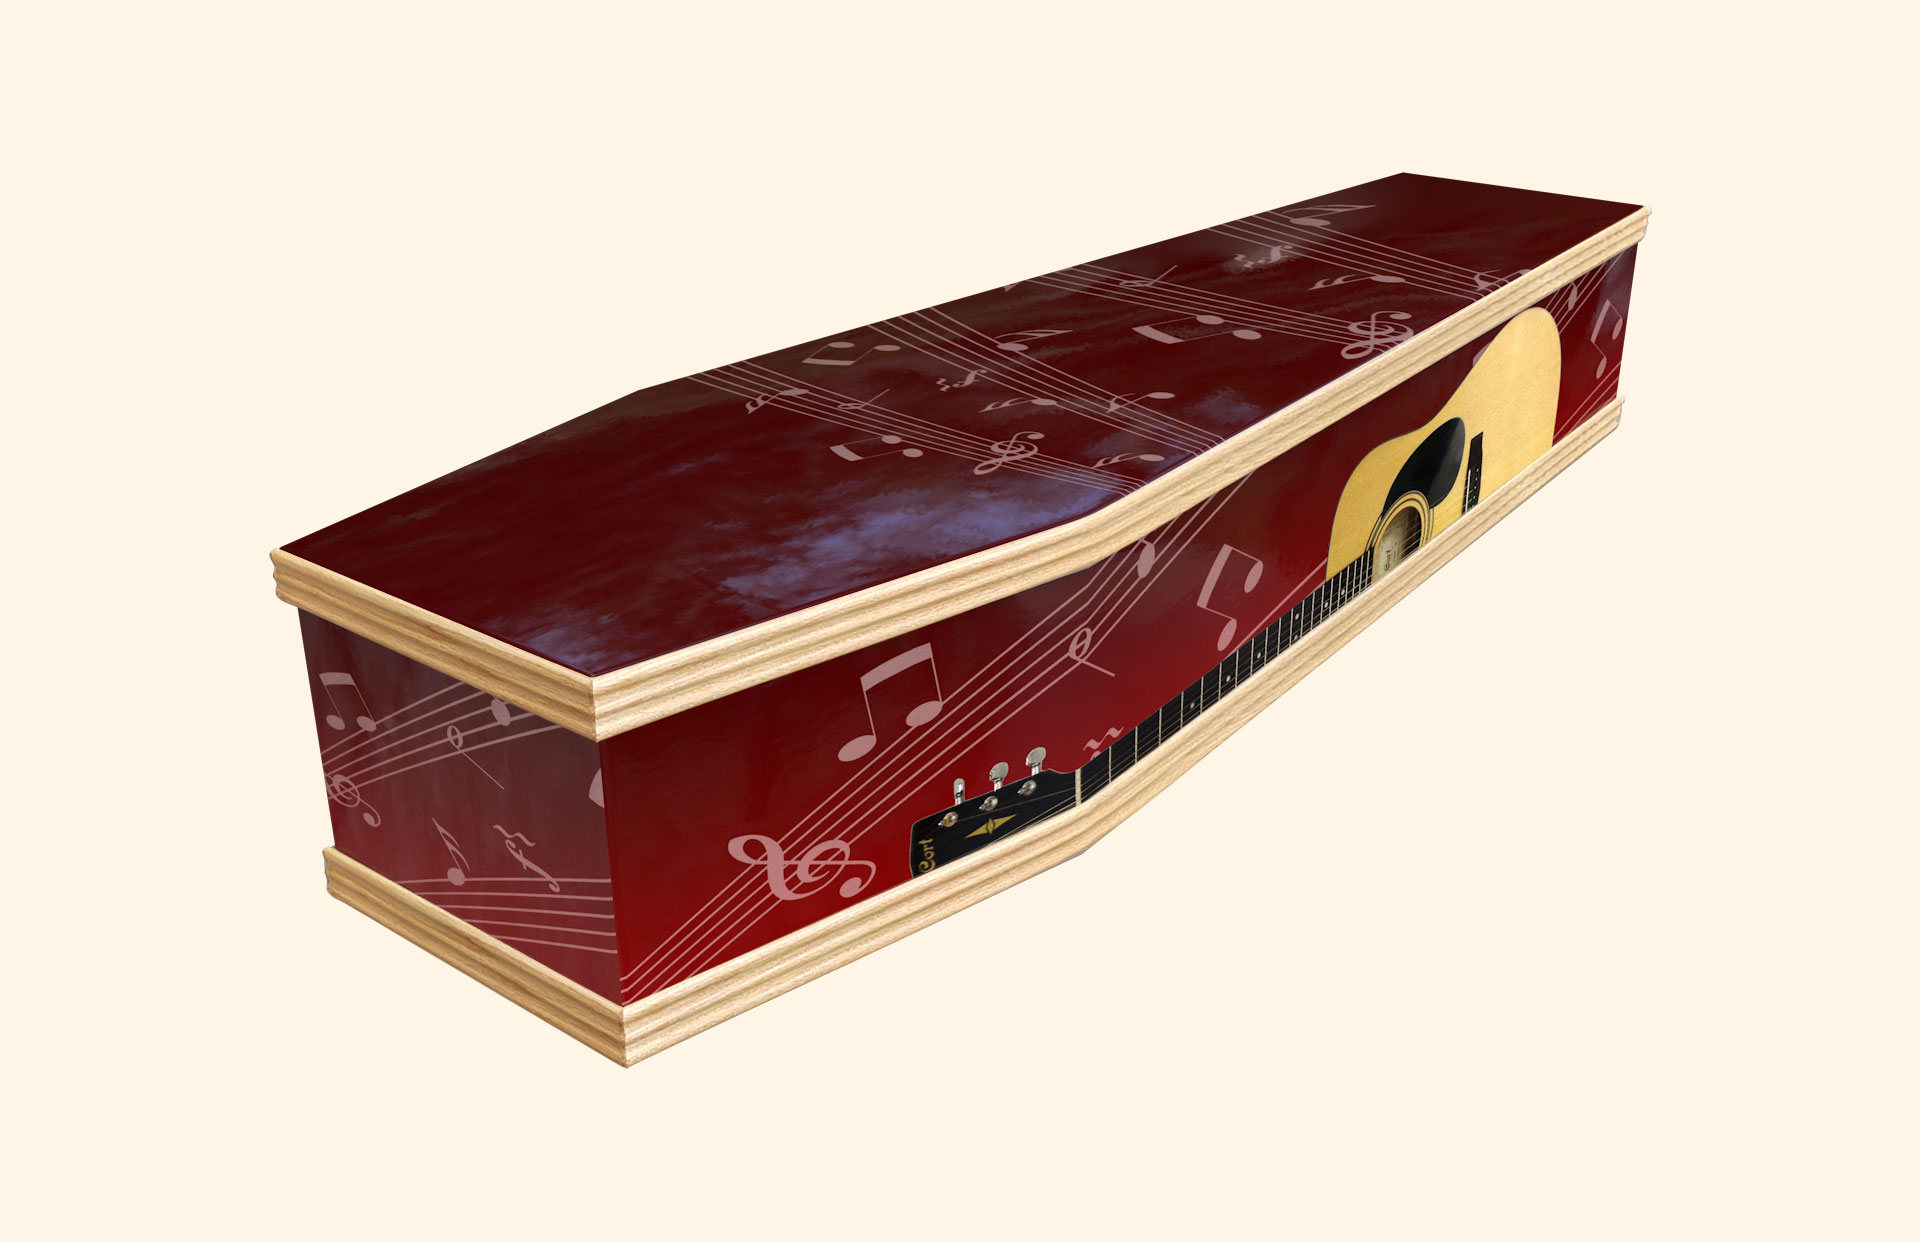 Guitar Music design on a classic coffin